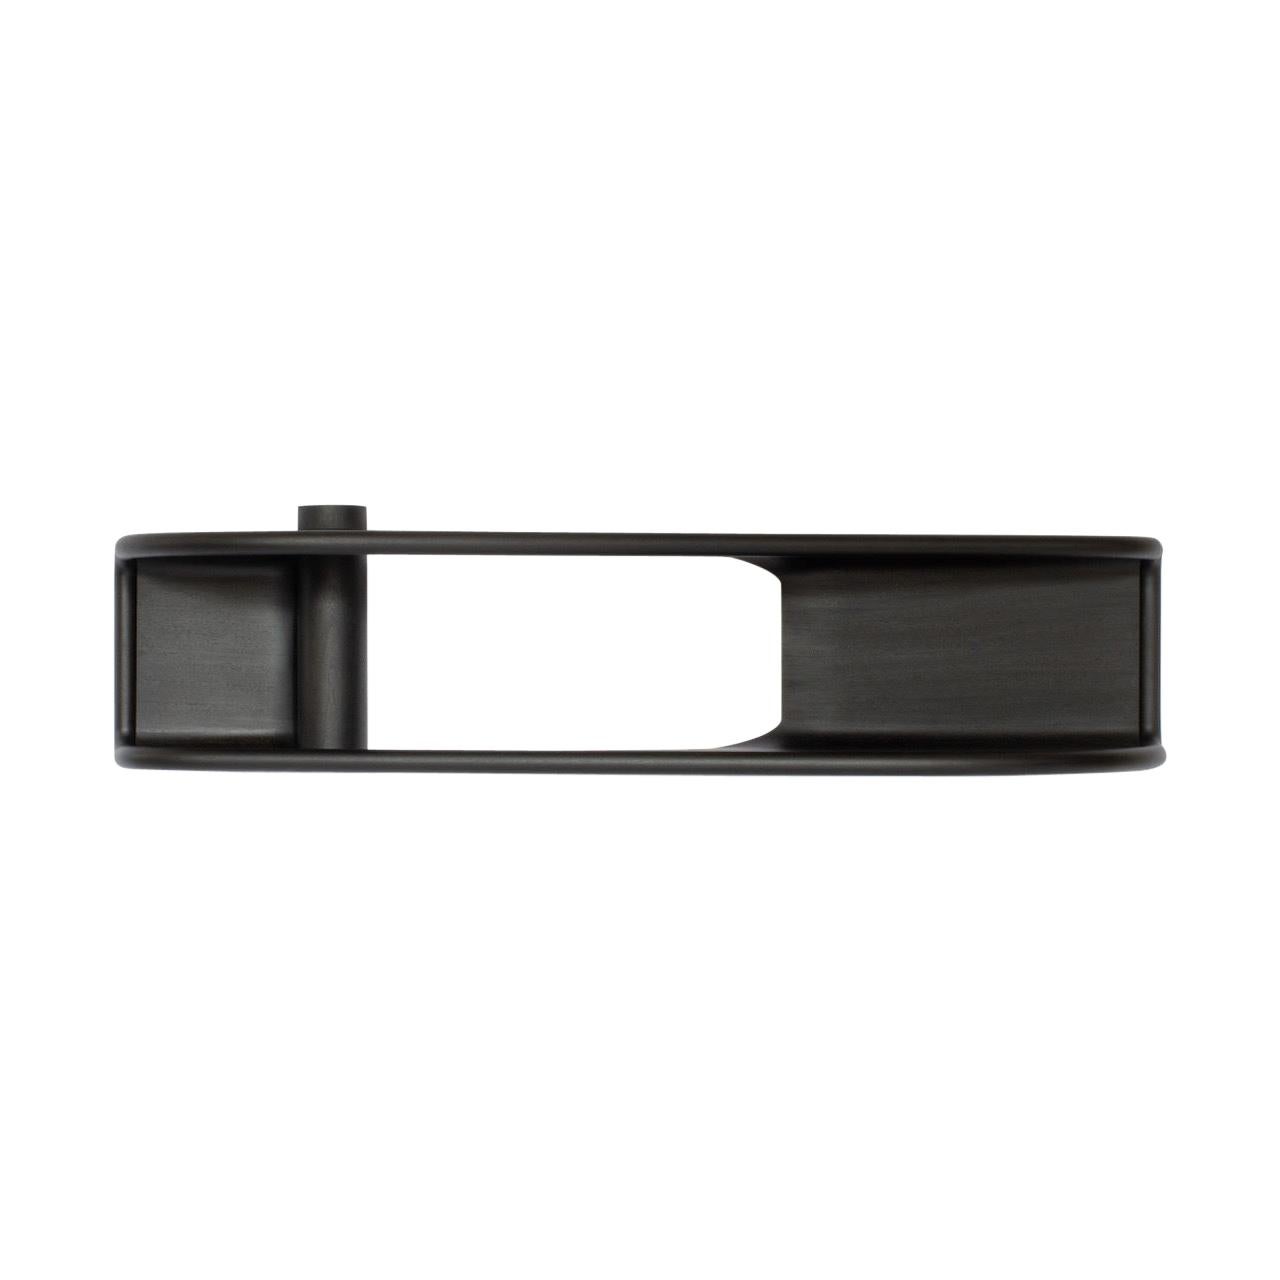 This sculptural wall-mounted console is part of a new line of contemporary furniture designed by blending digital technology with fine traditional craftsmanship. Carved from several pieces of ebonized wood, this large-scale piece features two